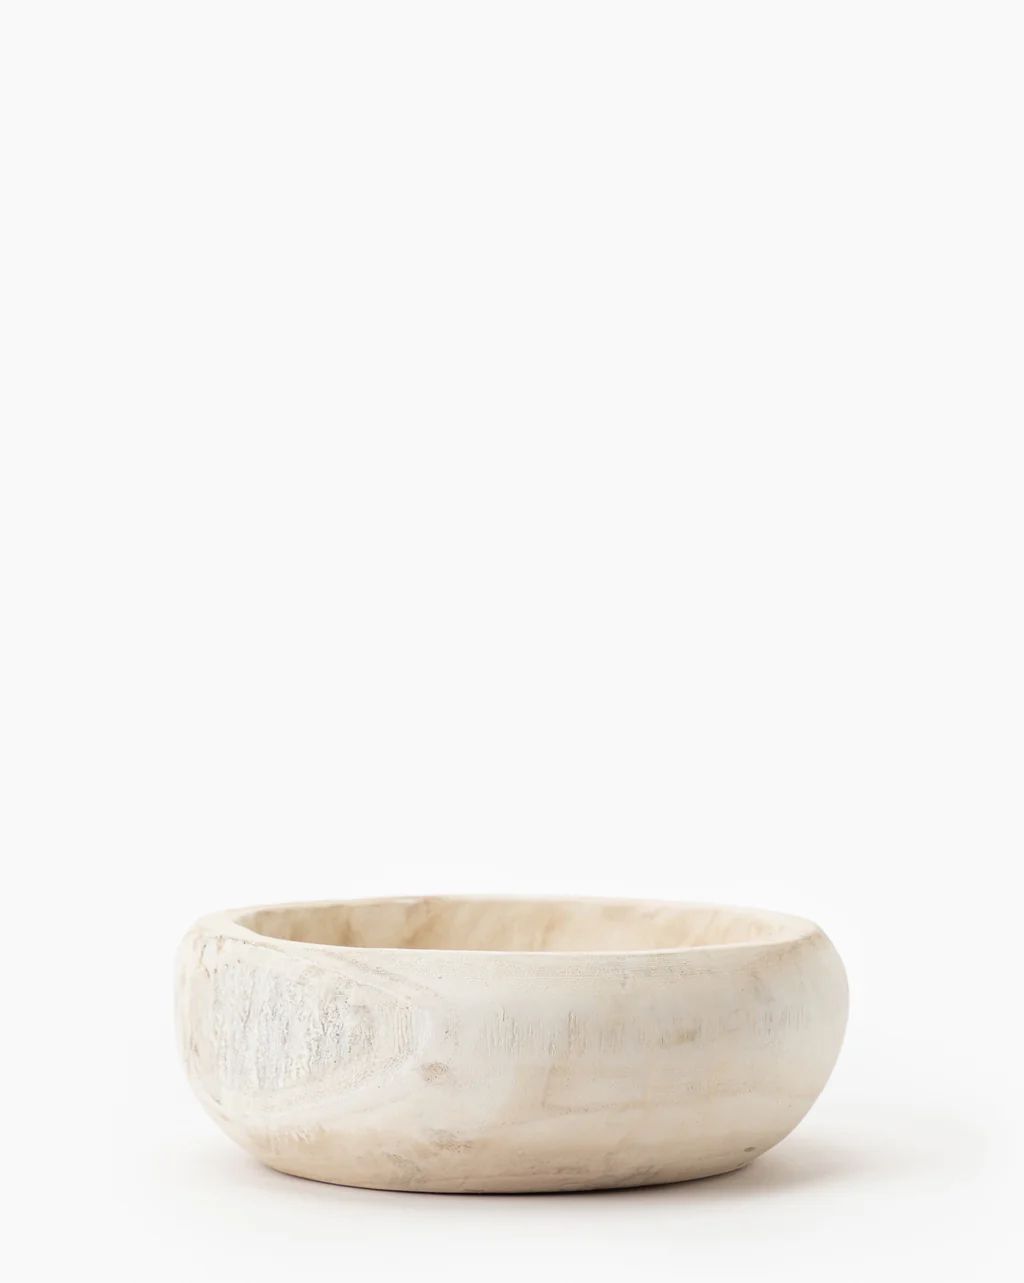 Whitewashed Wooden Bowl | McGee & Co.